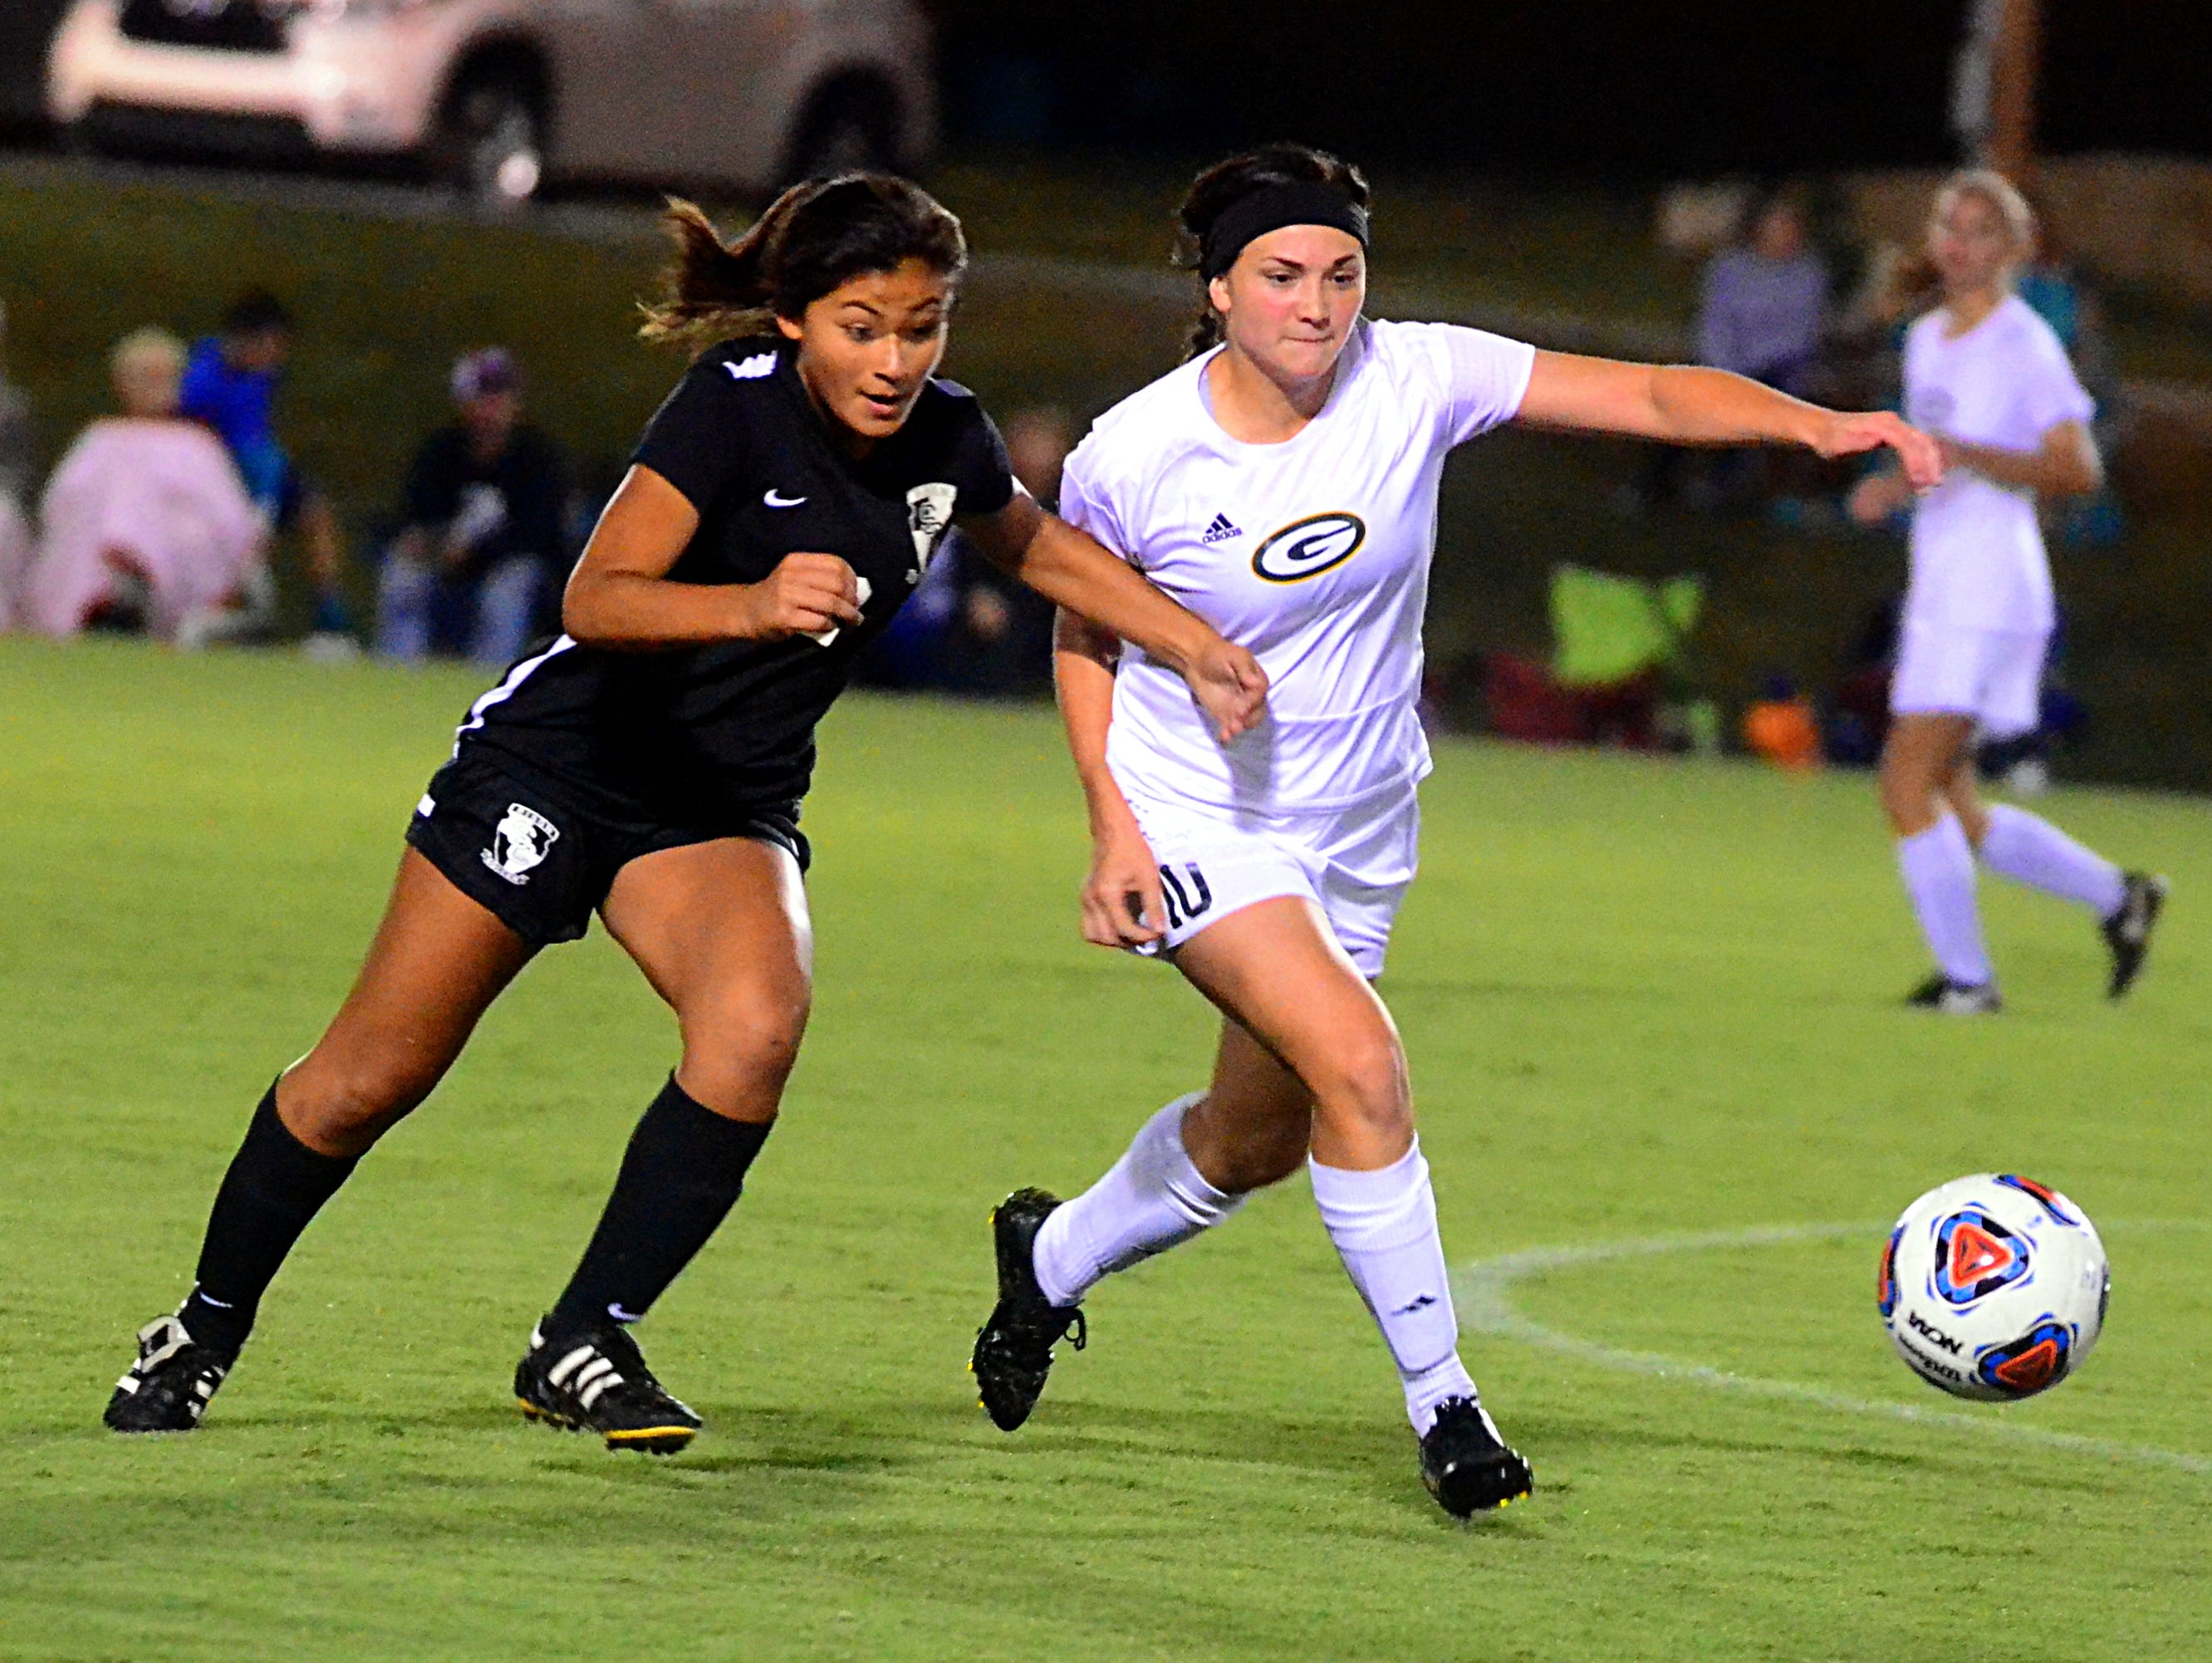 Station Camp junior Ariana Orellana (left) and Gallatin senior Veda Hooge battle for a loose ball during Thursday's match. Orellana scored a goal in the Lady Bison's 2-0 victory.